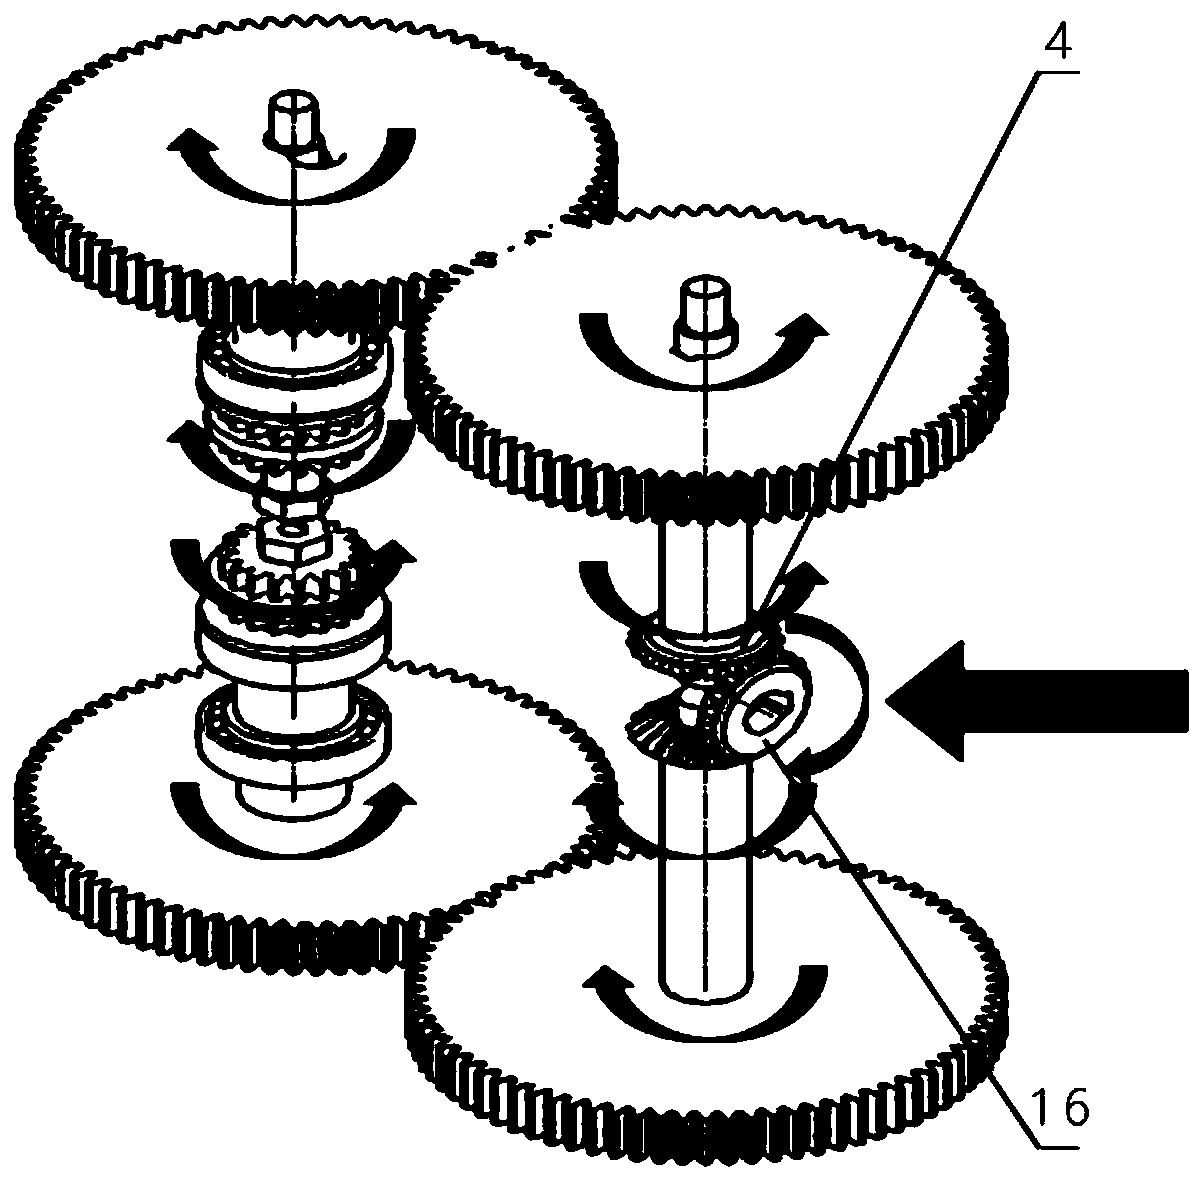 A self-balancing biaxial tensile test device driven by a single motor